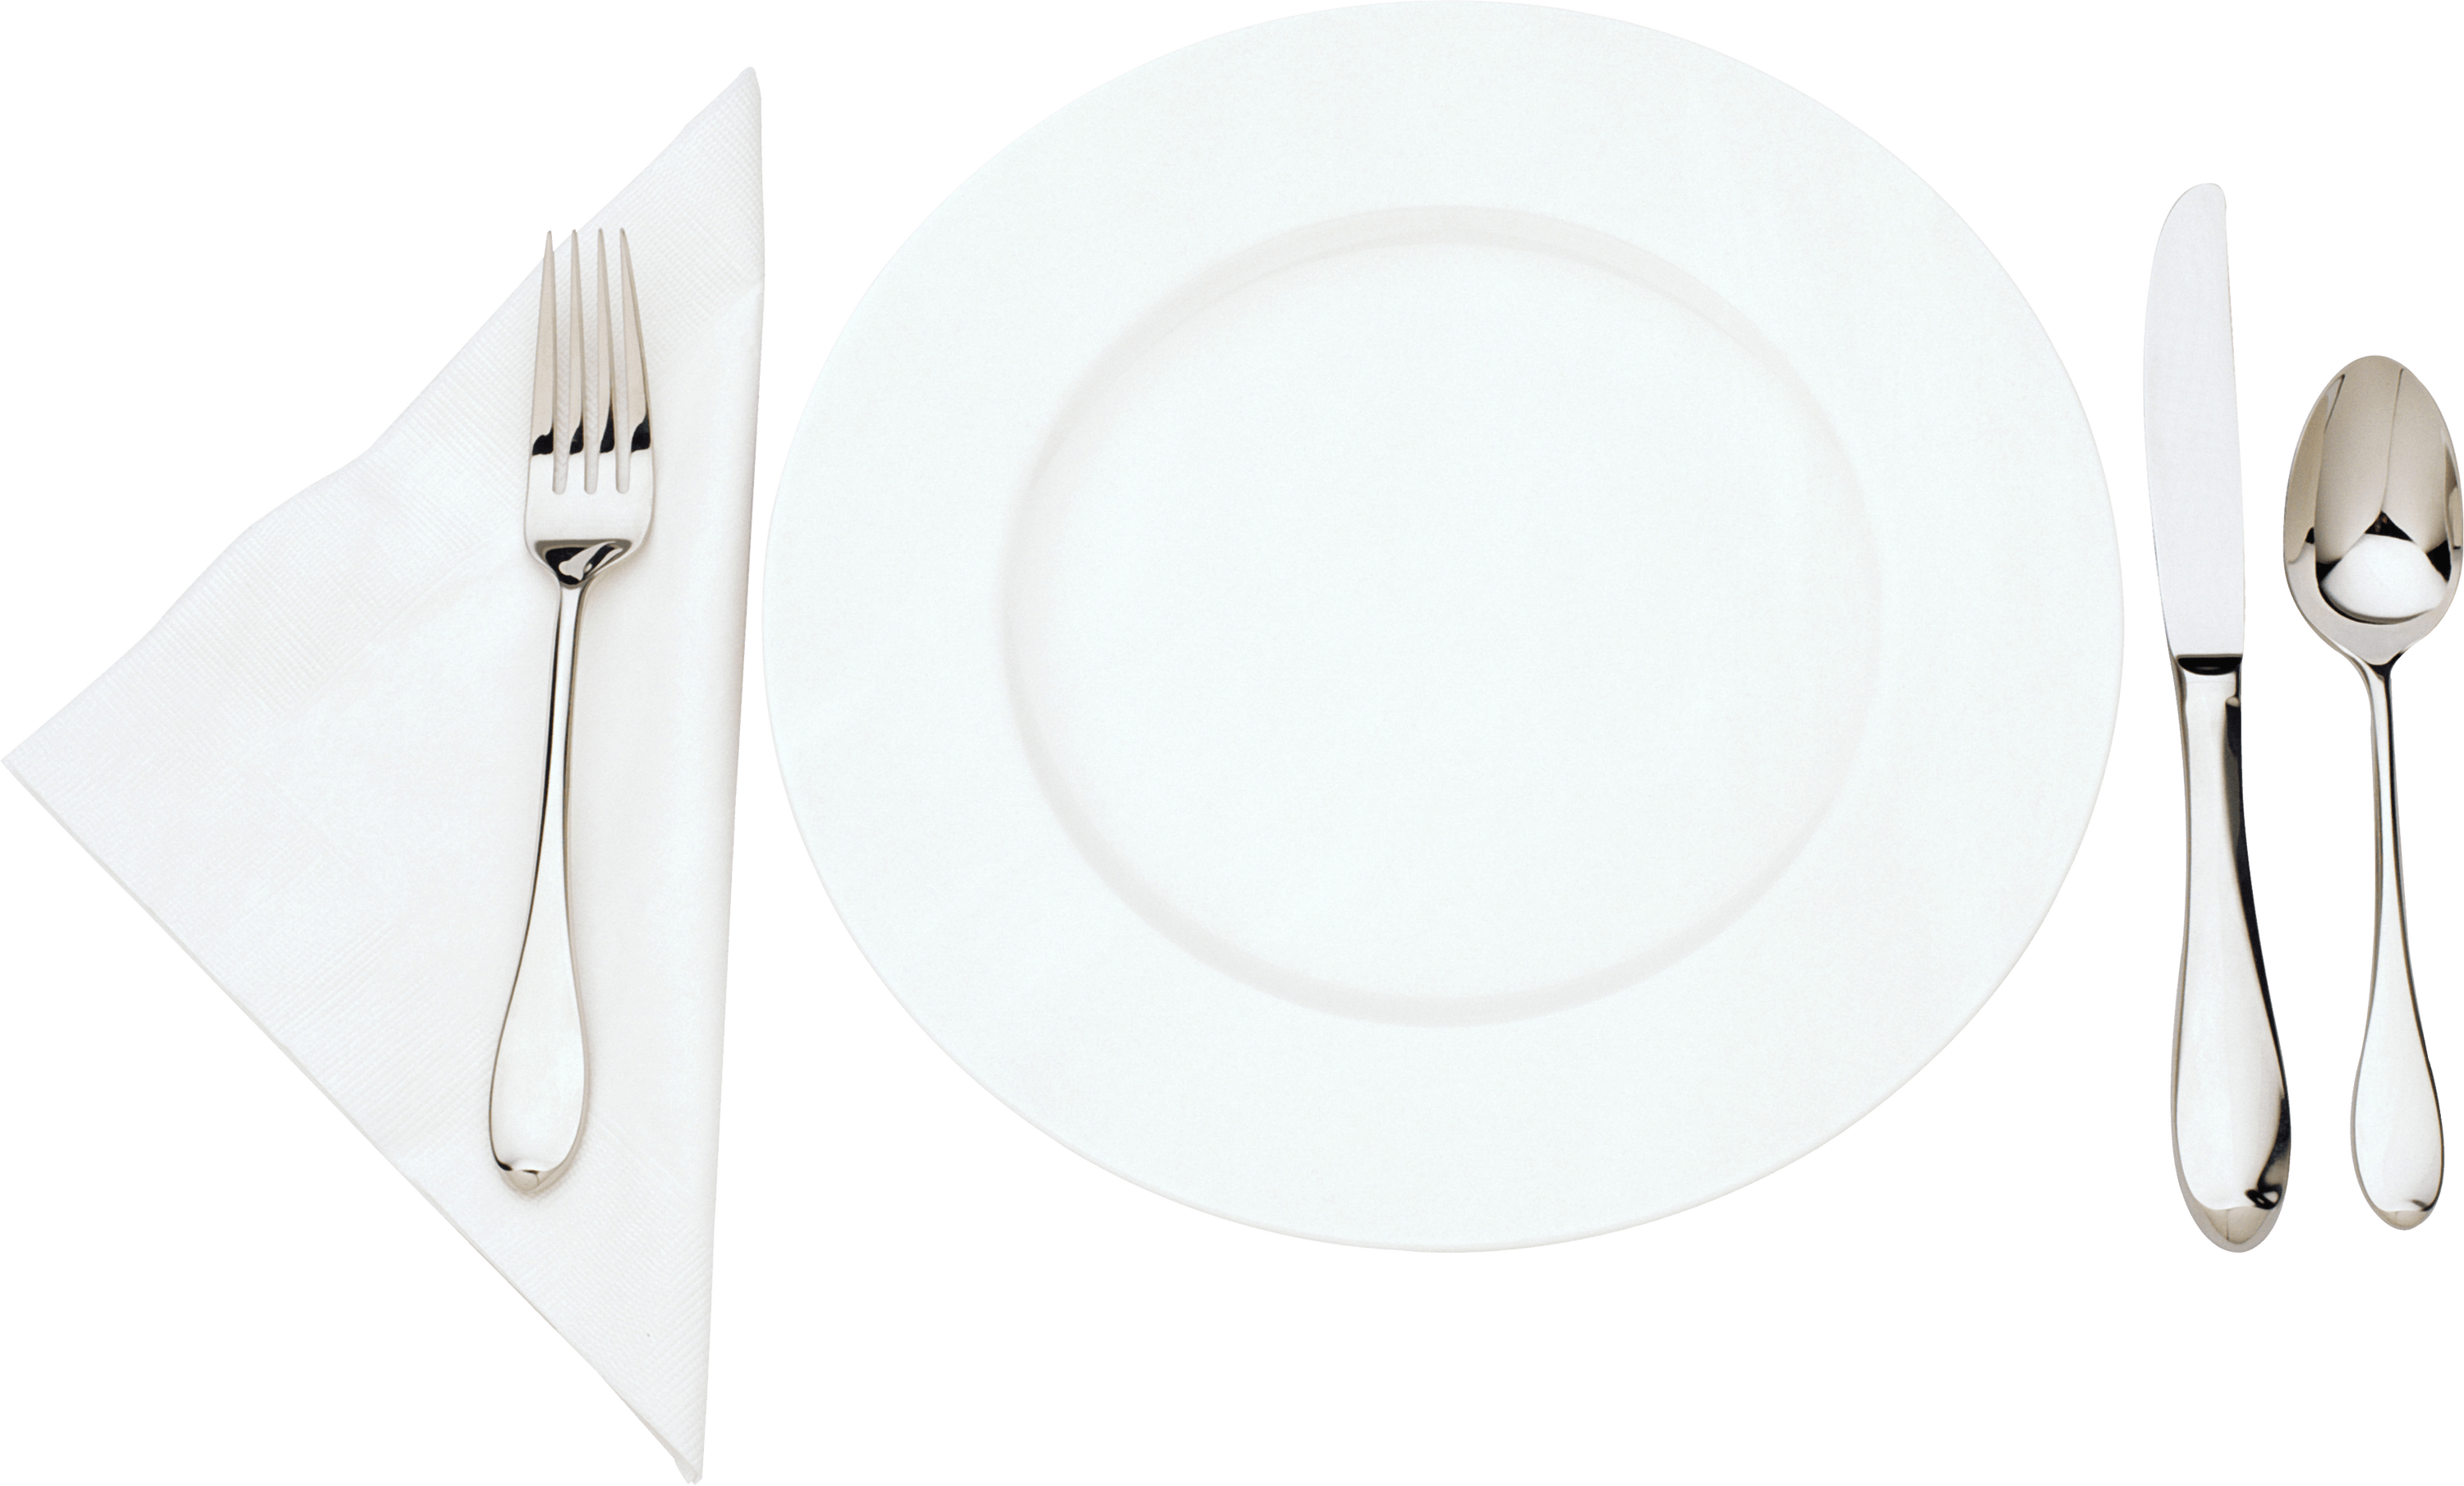 Plate PNG Photo